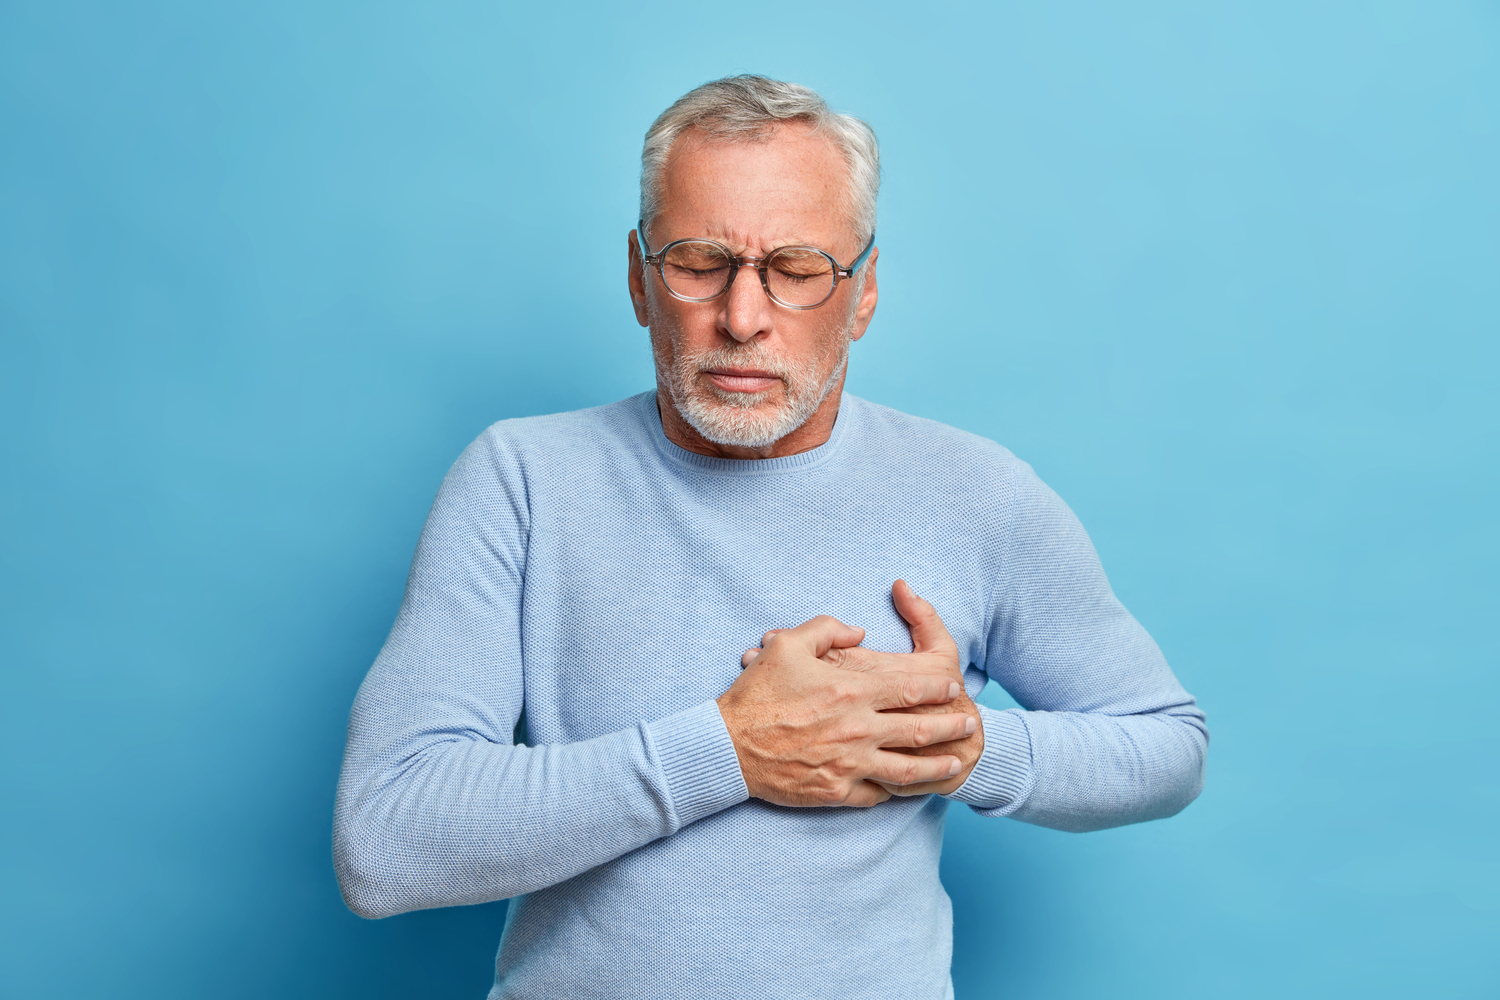 Heart Failure: Symptoms, Causes, Diagnosis, and Prevention